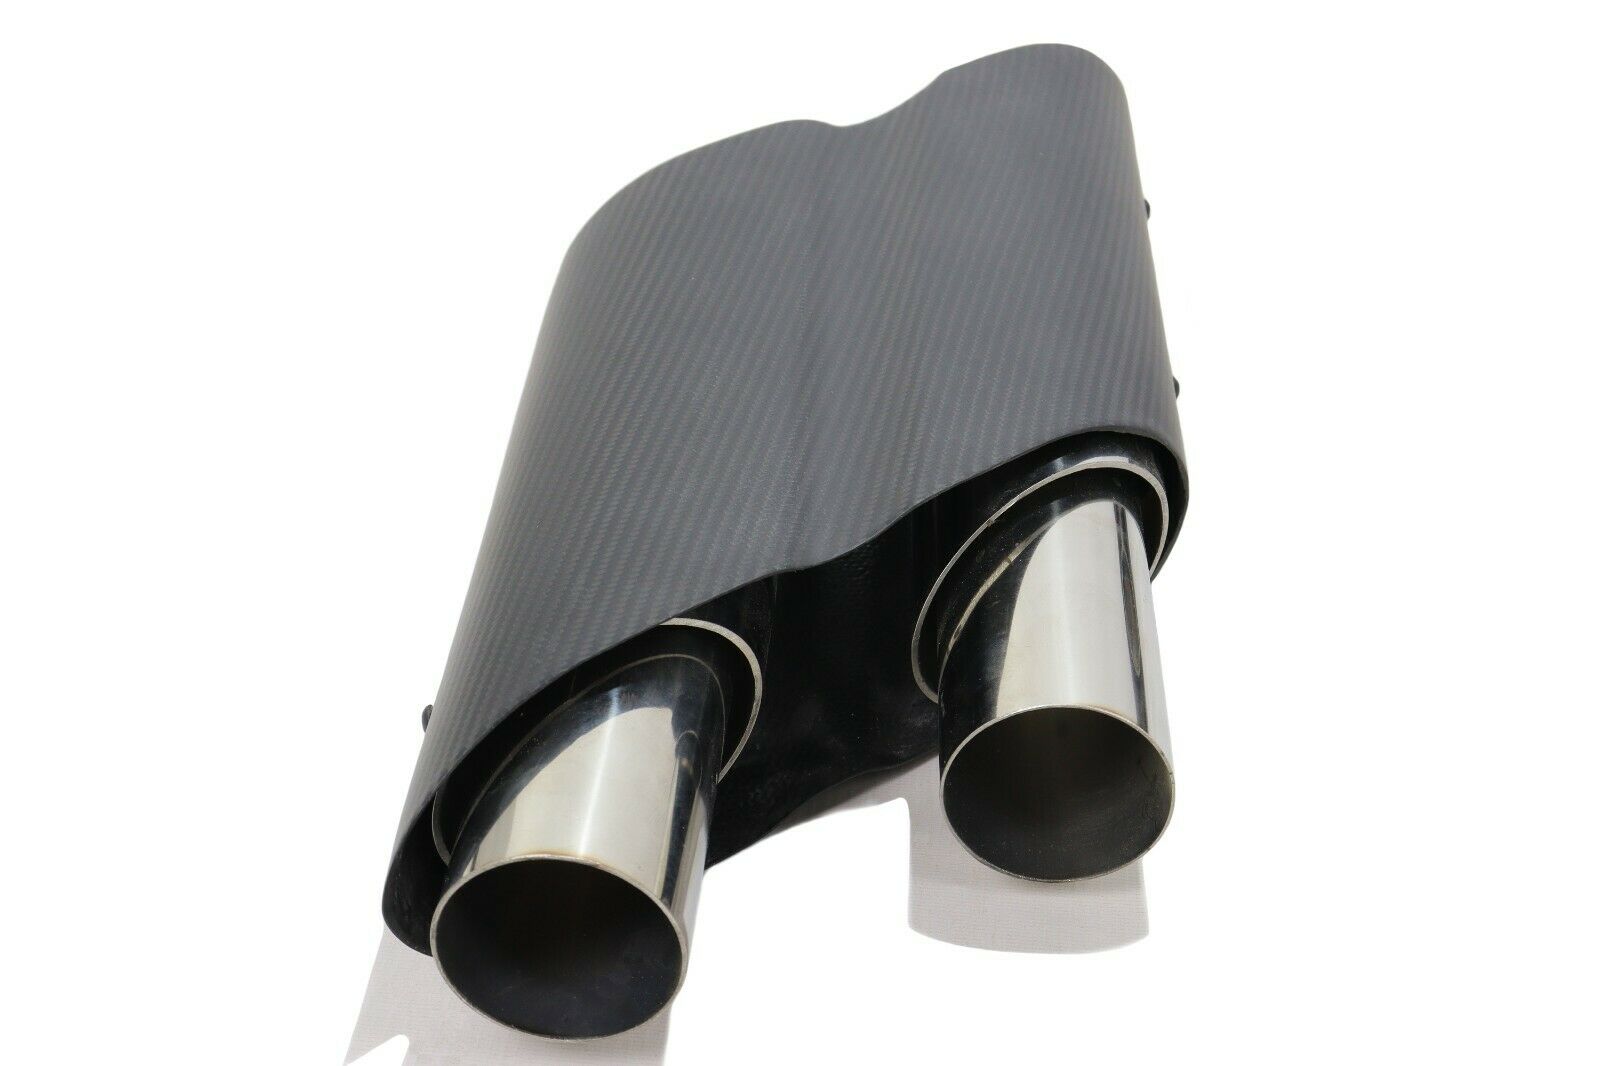 Brabus style exhaust pipes mufflers Rocket Edition for Mercedes-Benz W463A W464 G-Class